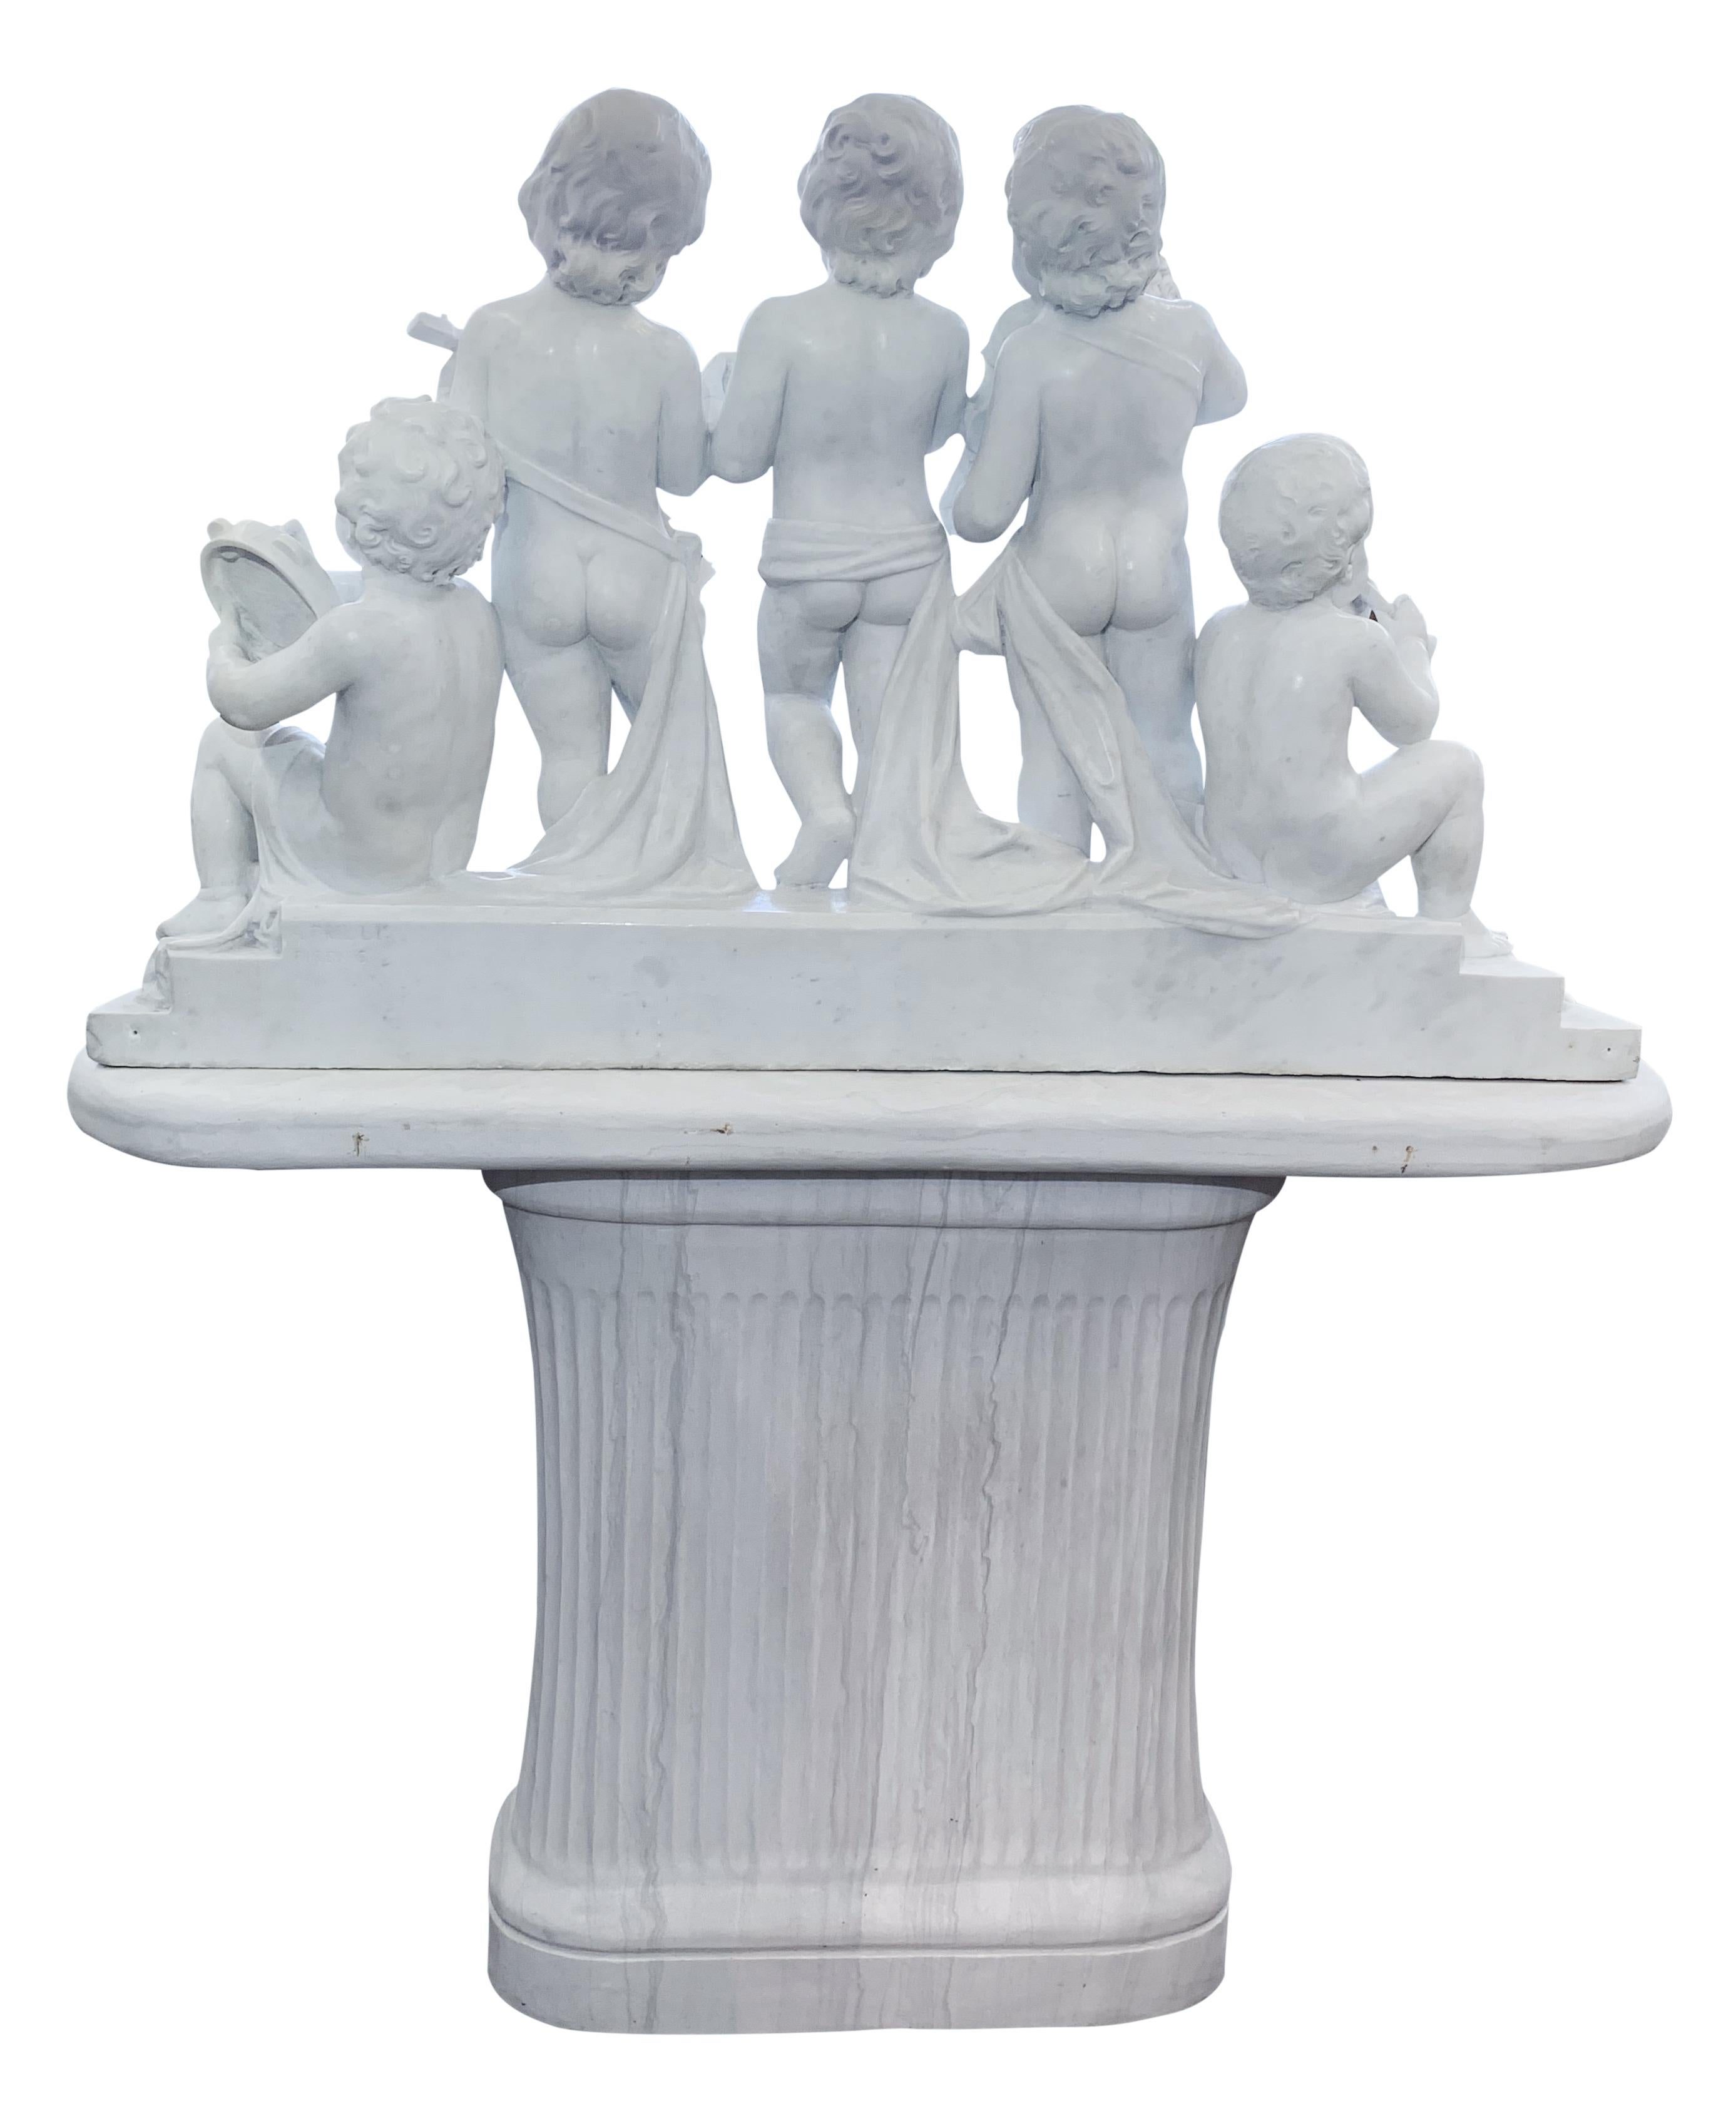 Large 19th Century Italian Carved Marble Group Depicting Musicians  on stand 11